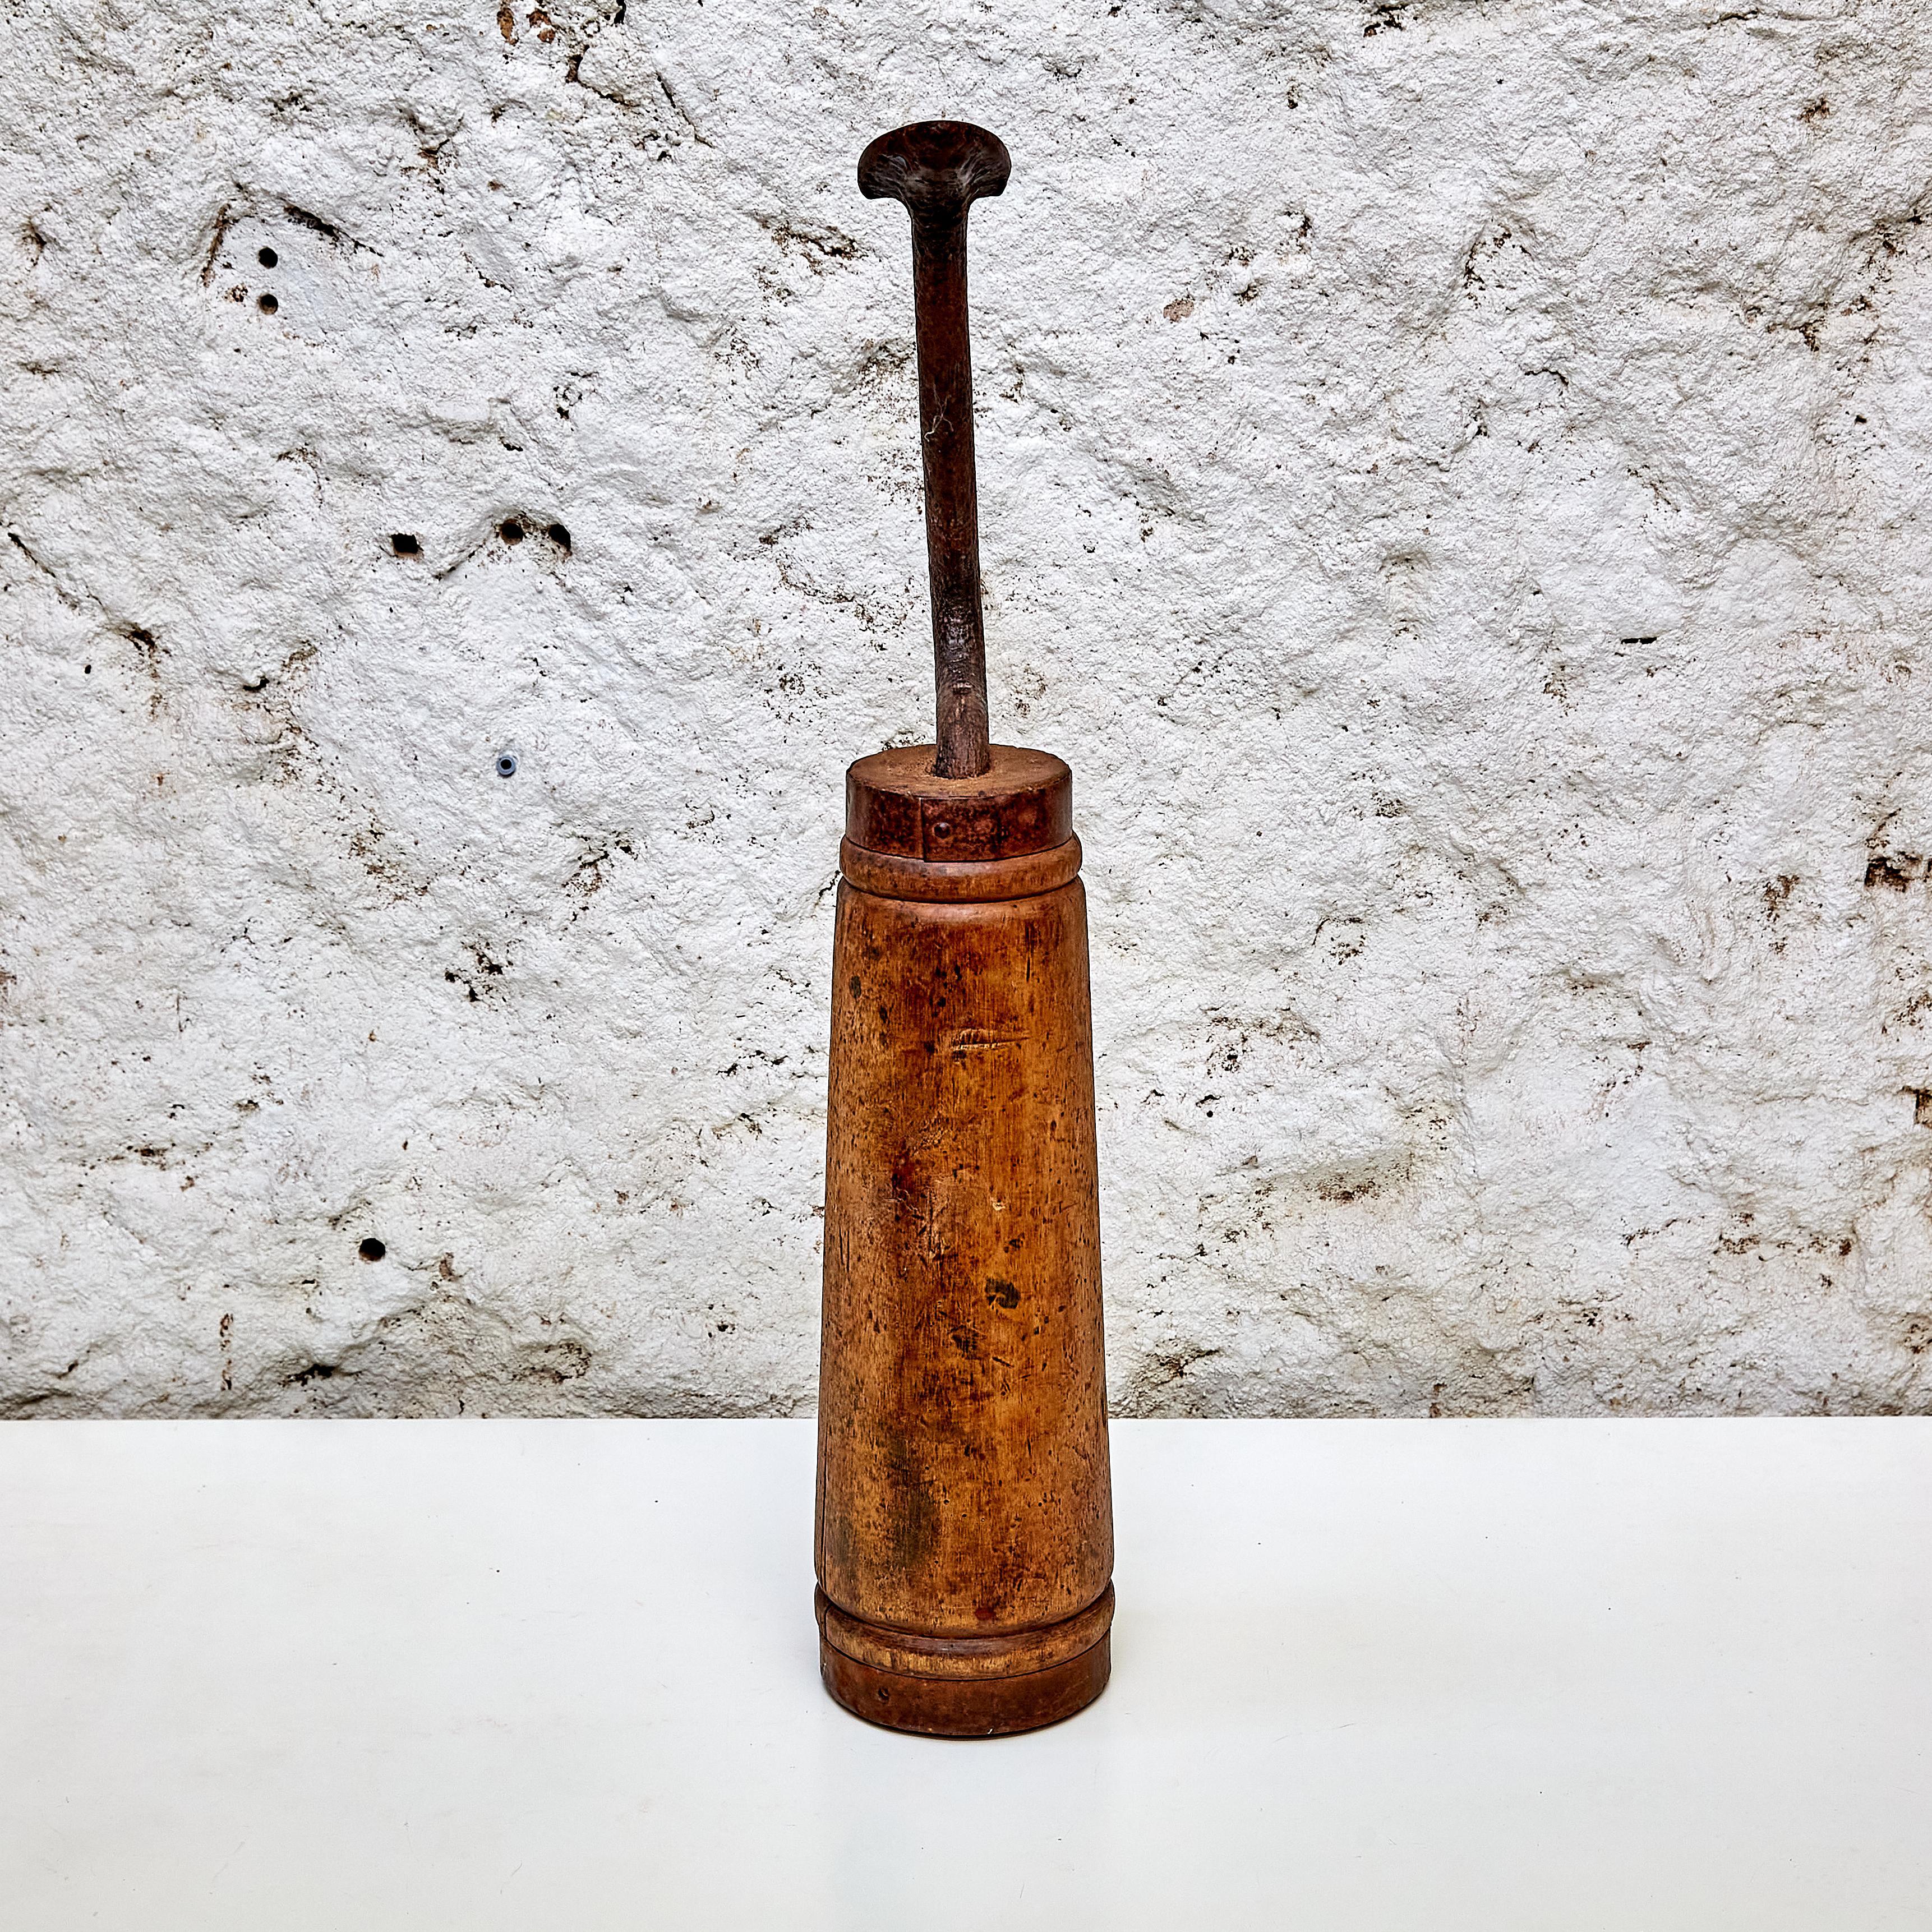 Antique Original Shoemaker Tool

Manufactured in Spain, circa 1950.

In original condition with minor wear consistent of age and use, preserving a beautiful patina.

Materials: 
Metal, wood

Dimensions: 
D 16 cm x W 12 cm x H 66 cm.

Important